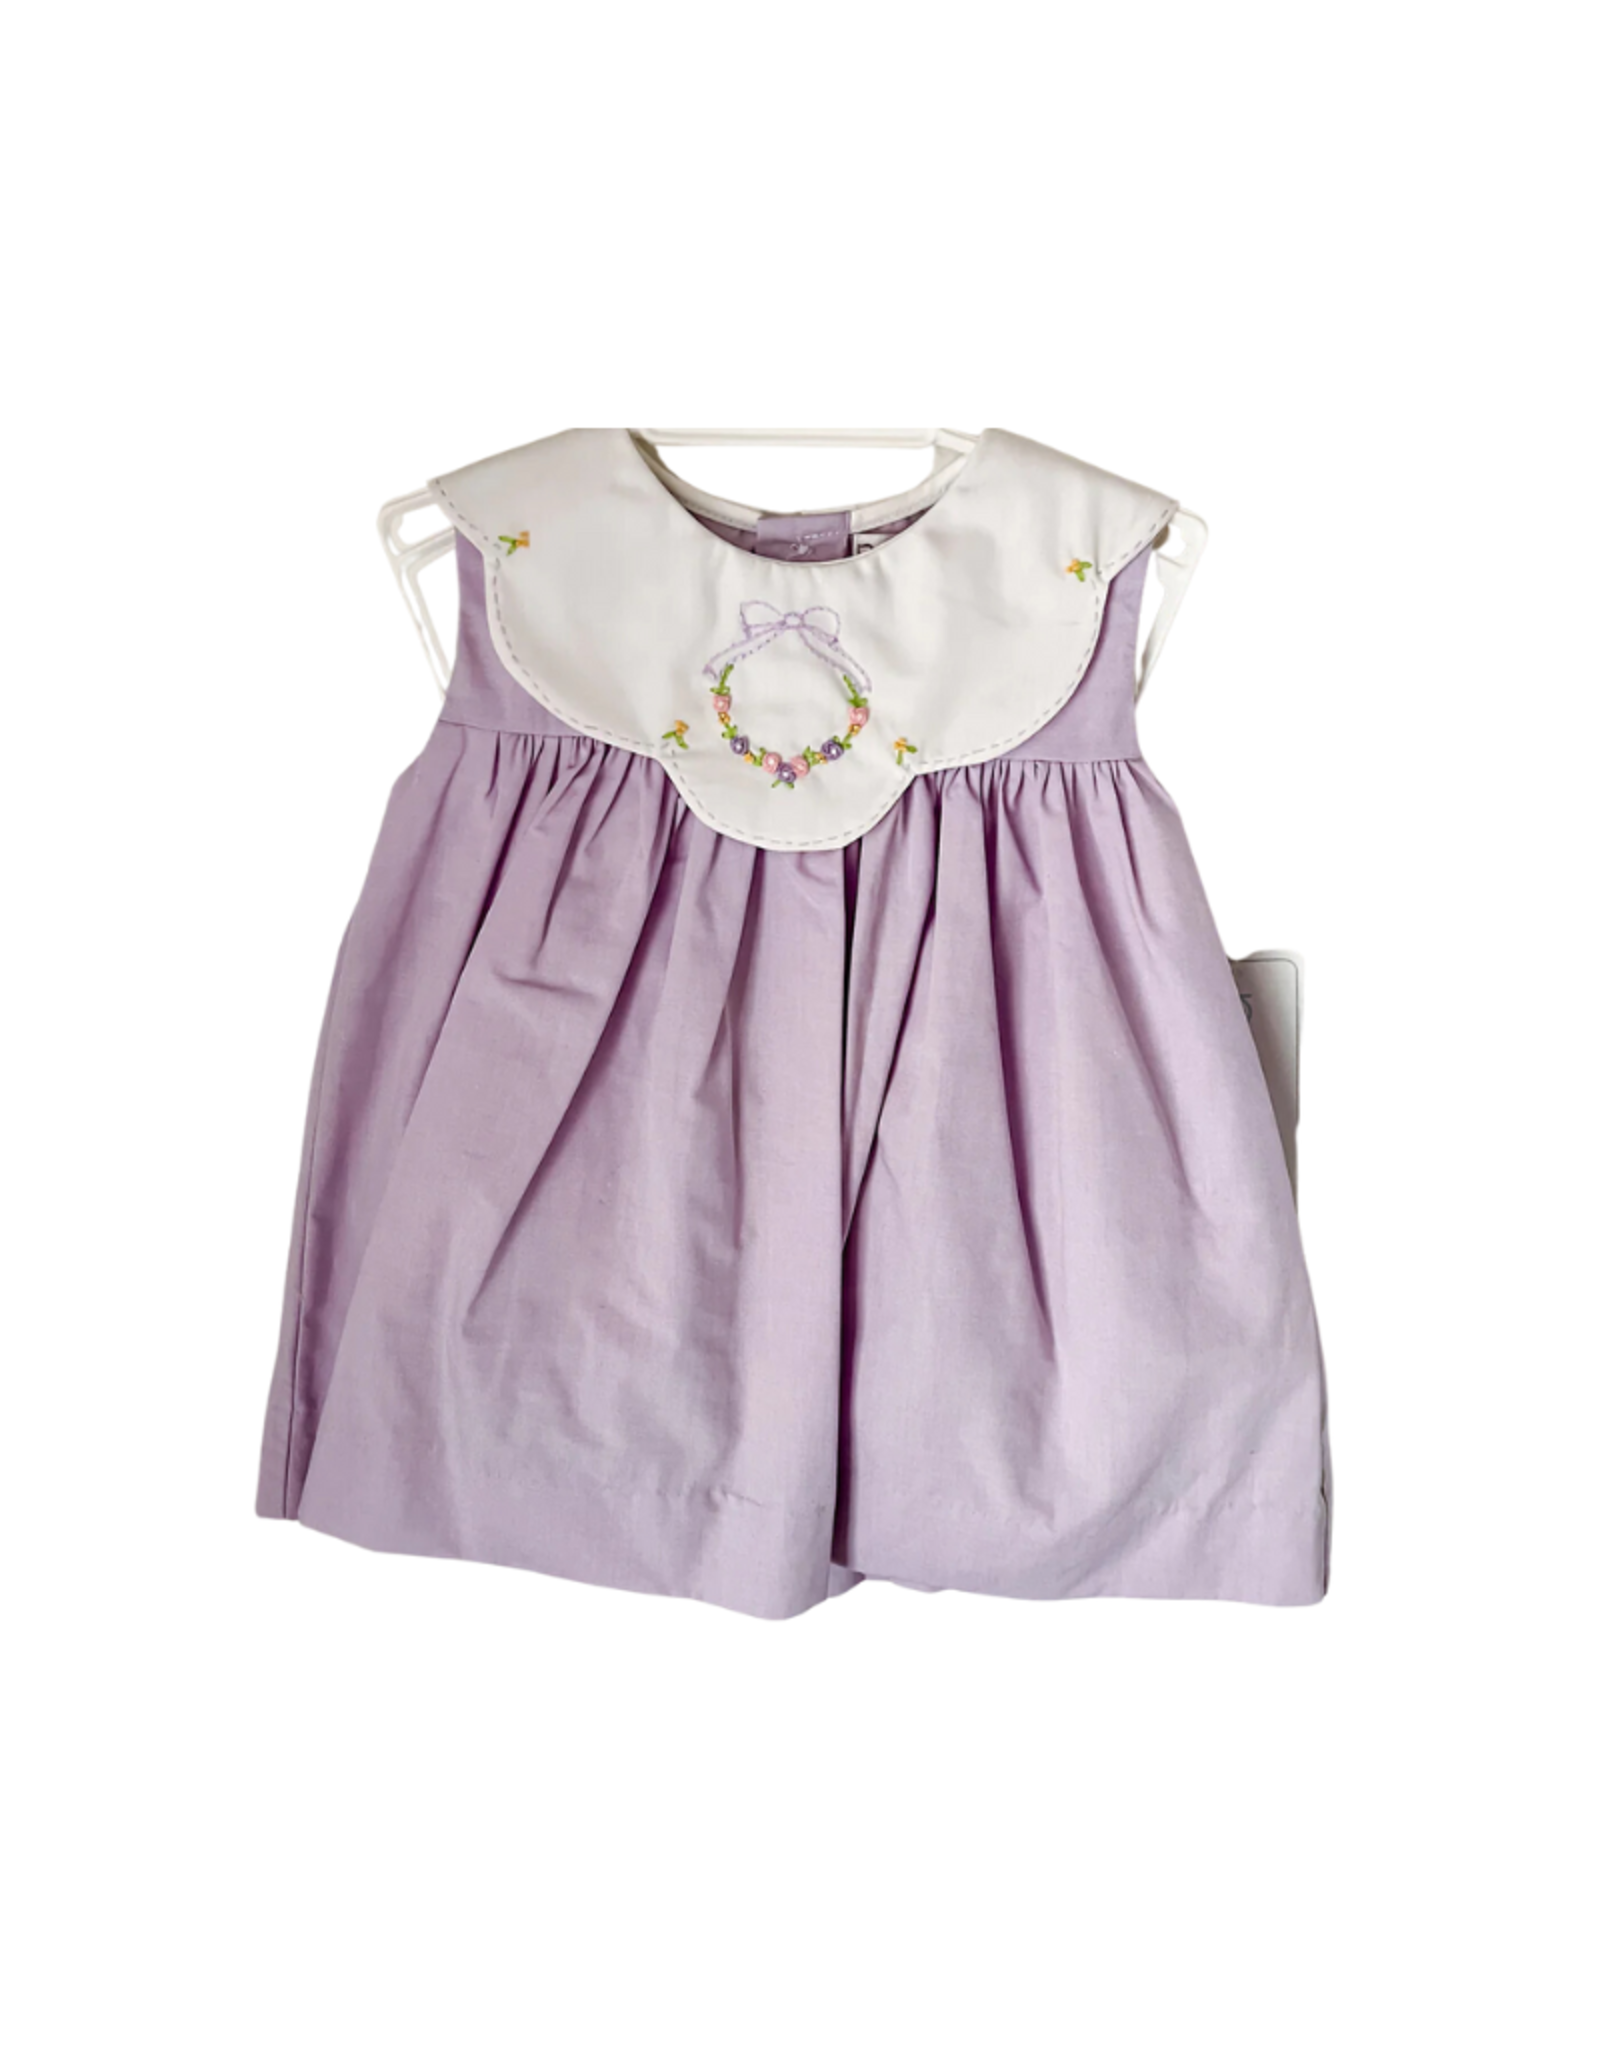 Petit Ami Lavender Scallop Collar Dress with Embroidered Wreath